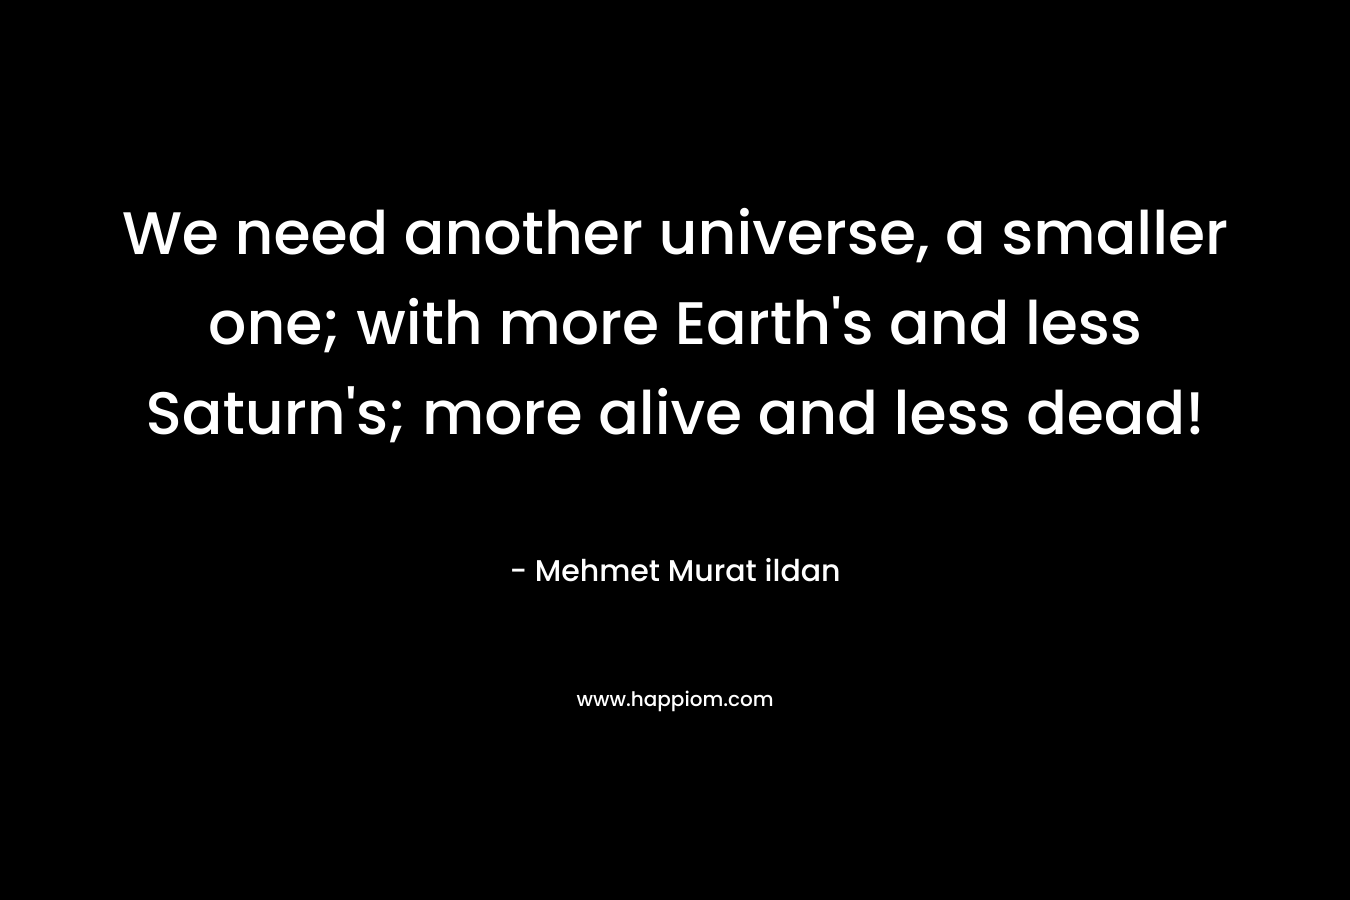 We need another universe, a smaller one; with more Earth's and less Saturn's; more alive and less dead!